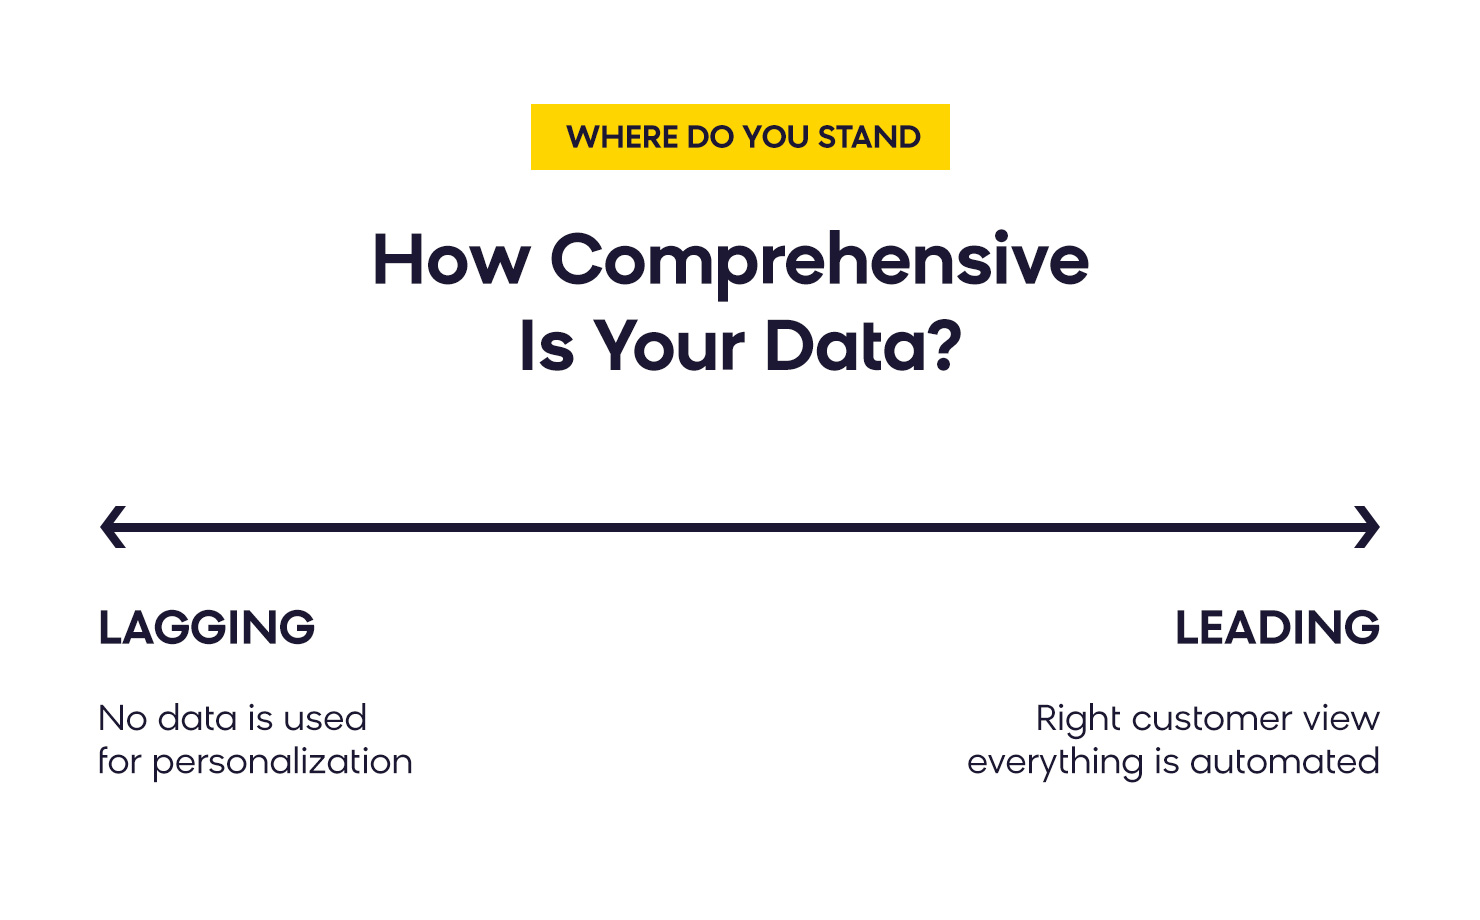 How comprehensive is your customer data?